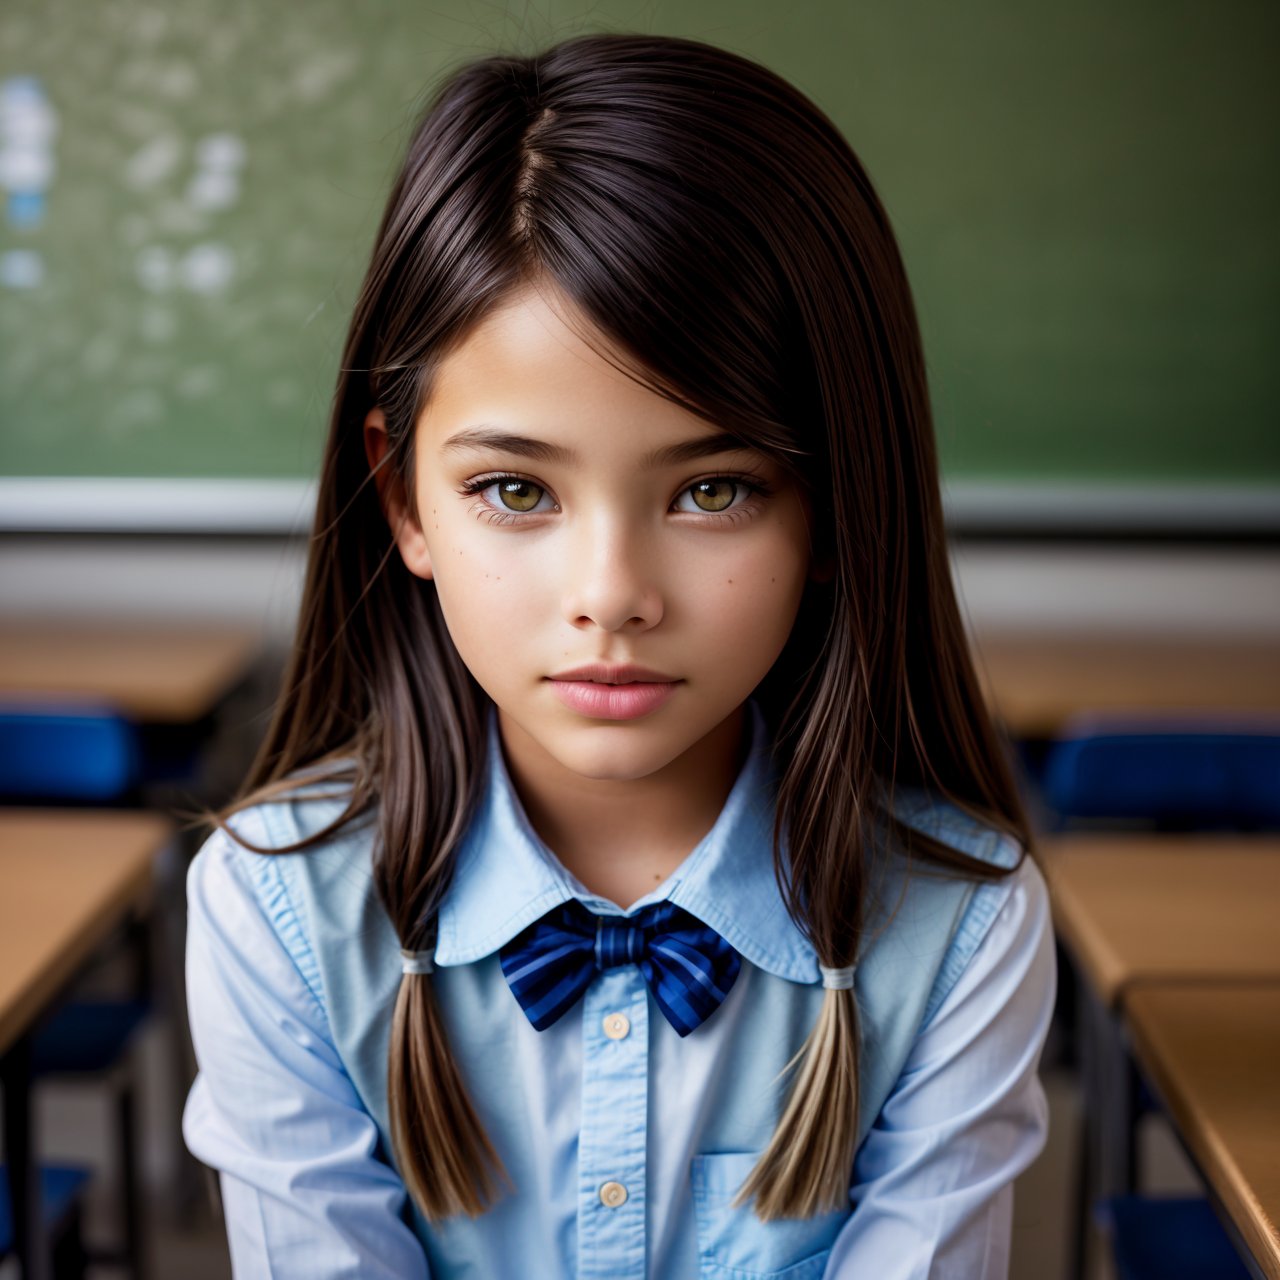 wallpaper, looking at viewer, portrait of calm (AIDA_LoRA_LG2014:1.12) <lora:AIDA_LoRA_LG2014:0.69> in a thyme school uniform posing in the classroom, little girl, pretty face, naughty, cinematic, dramatic, insane level of details, studio photo, studio photo, kkw-ph1, hdr, f1.8, (colorful:1.1)